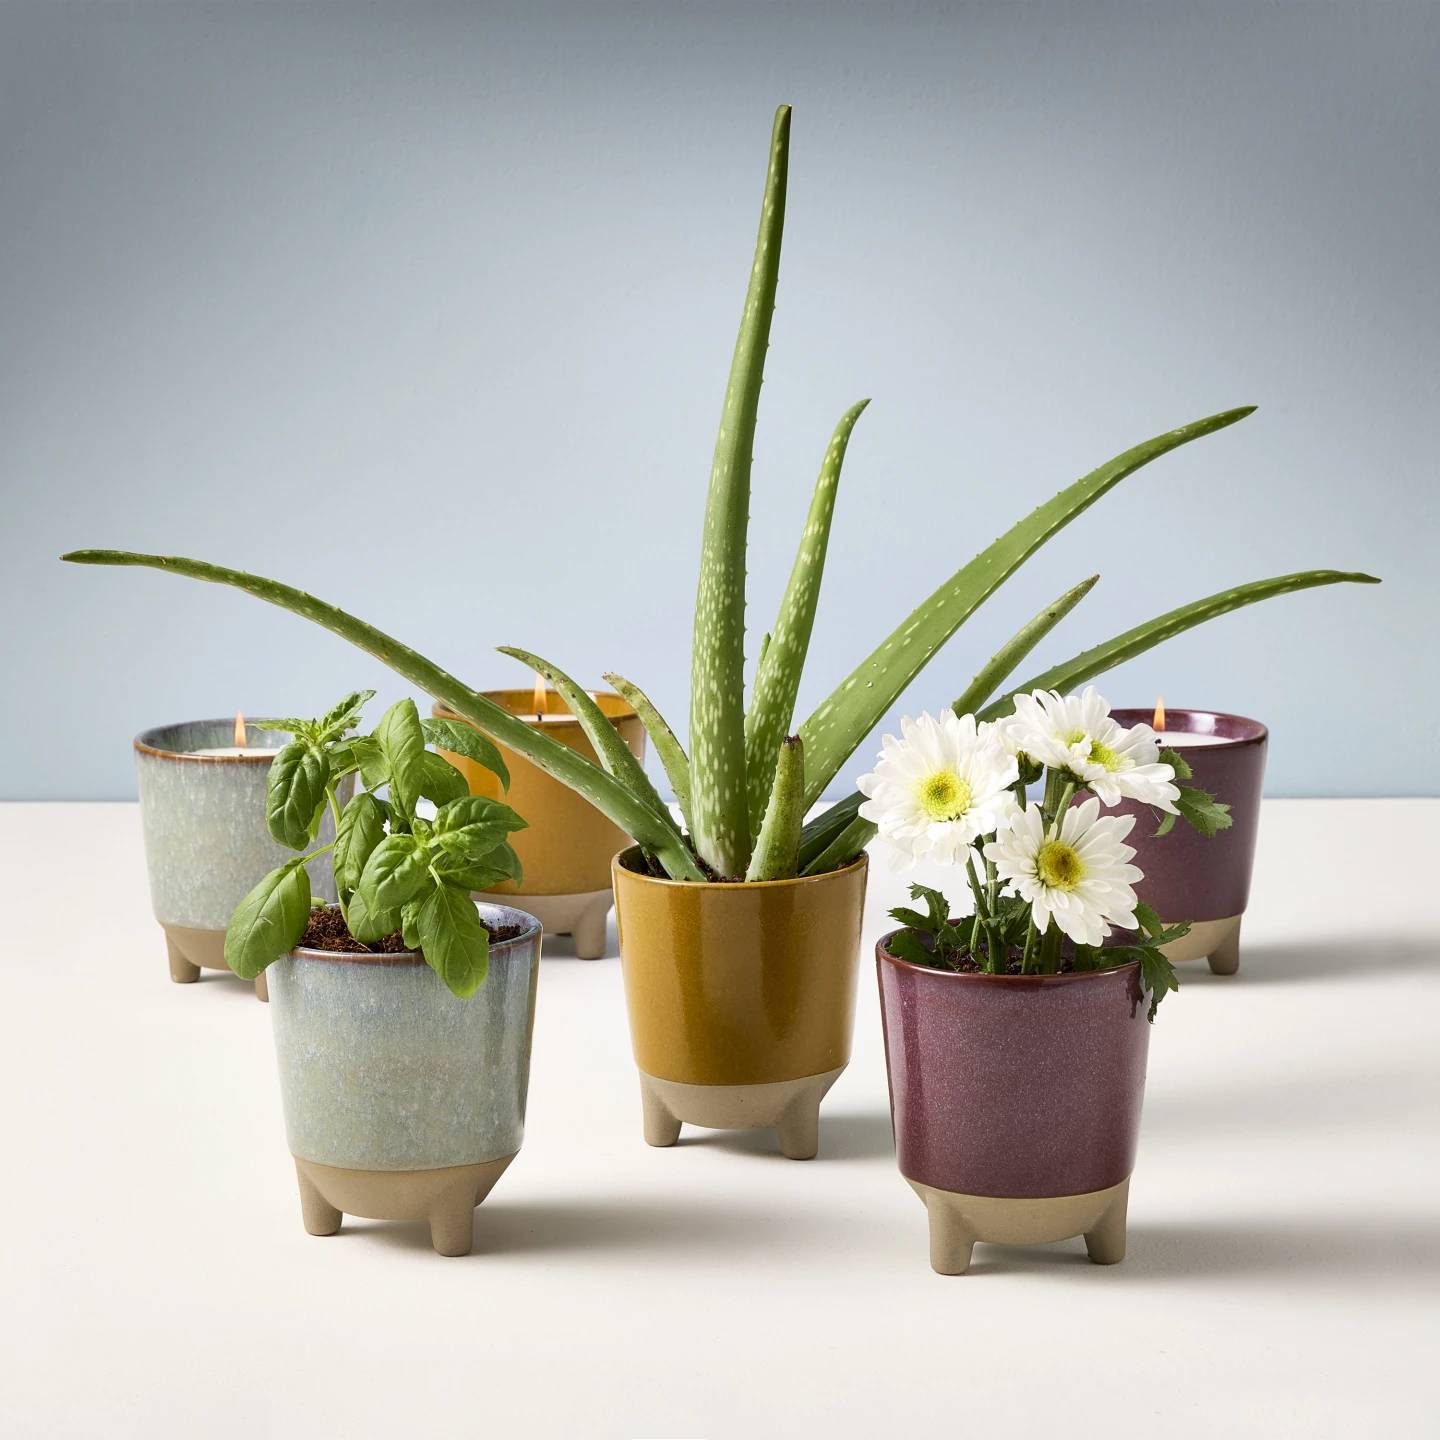 This image provided by Modern Sprout shows a collection of Glow and Grow candles, which can be recycled into planters using their included seed packs after they burn out.